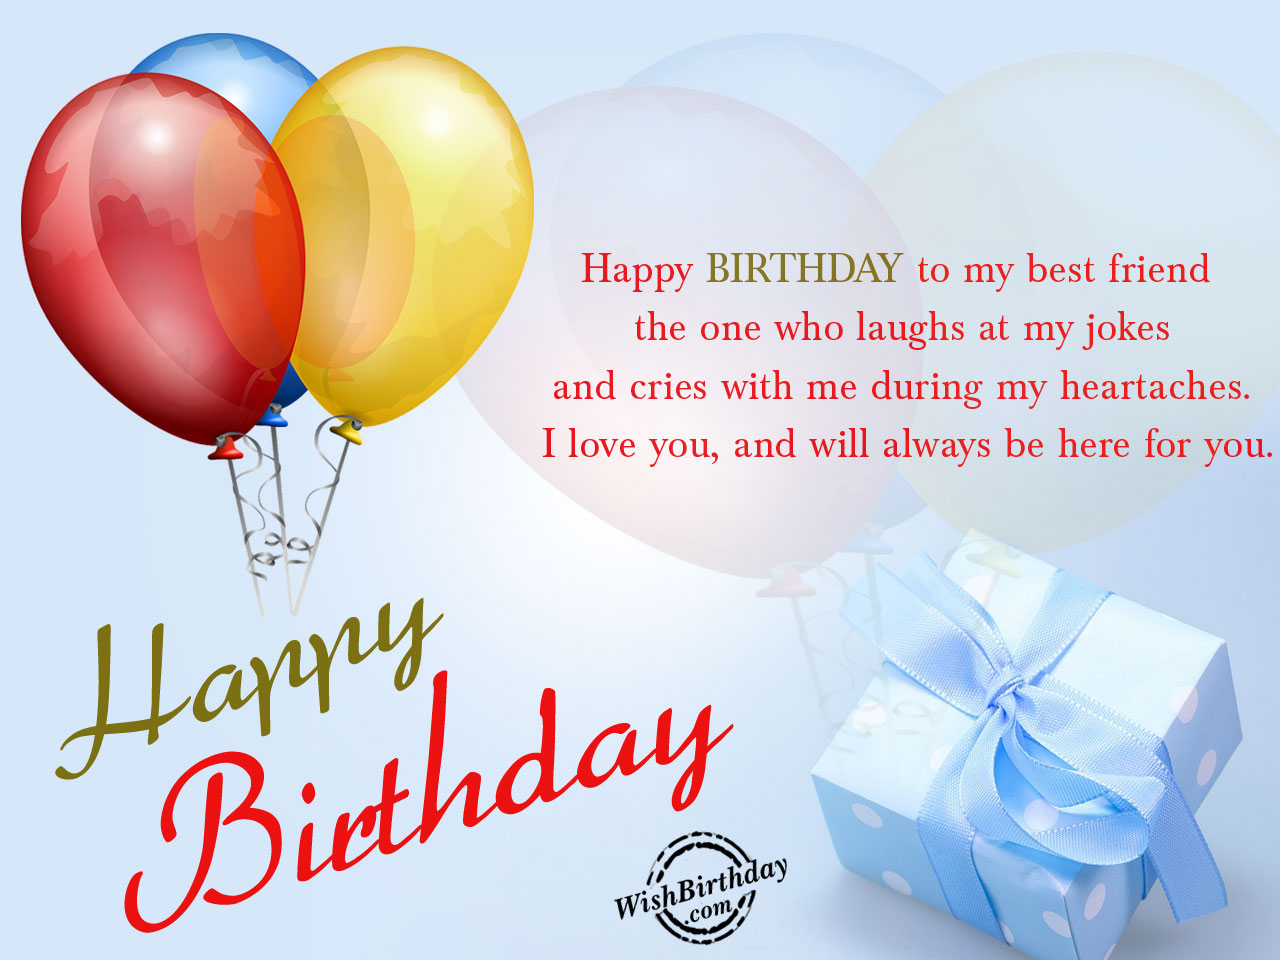 birthday-wishes-for-best-friend-birthday-images-pictures